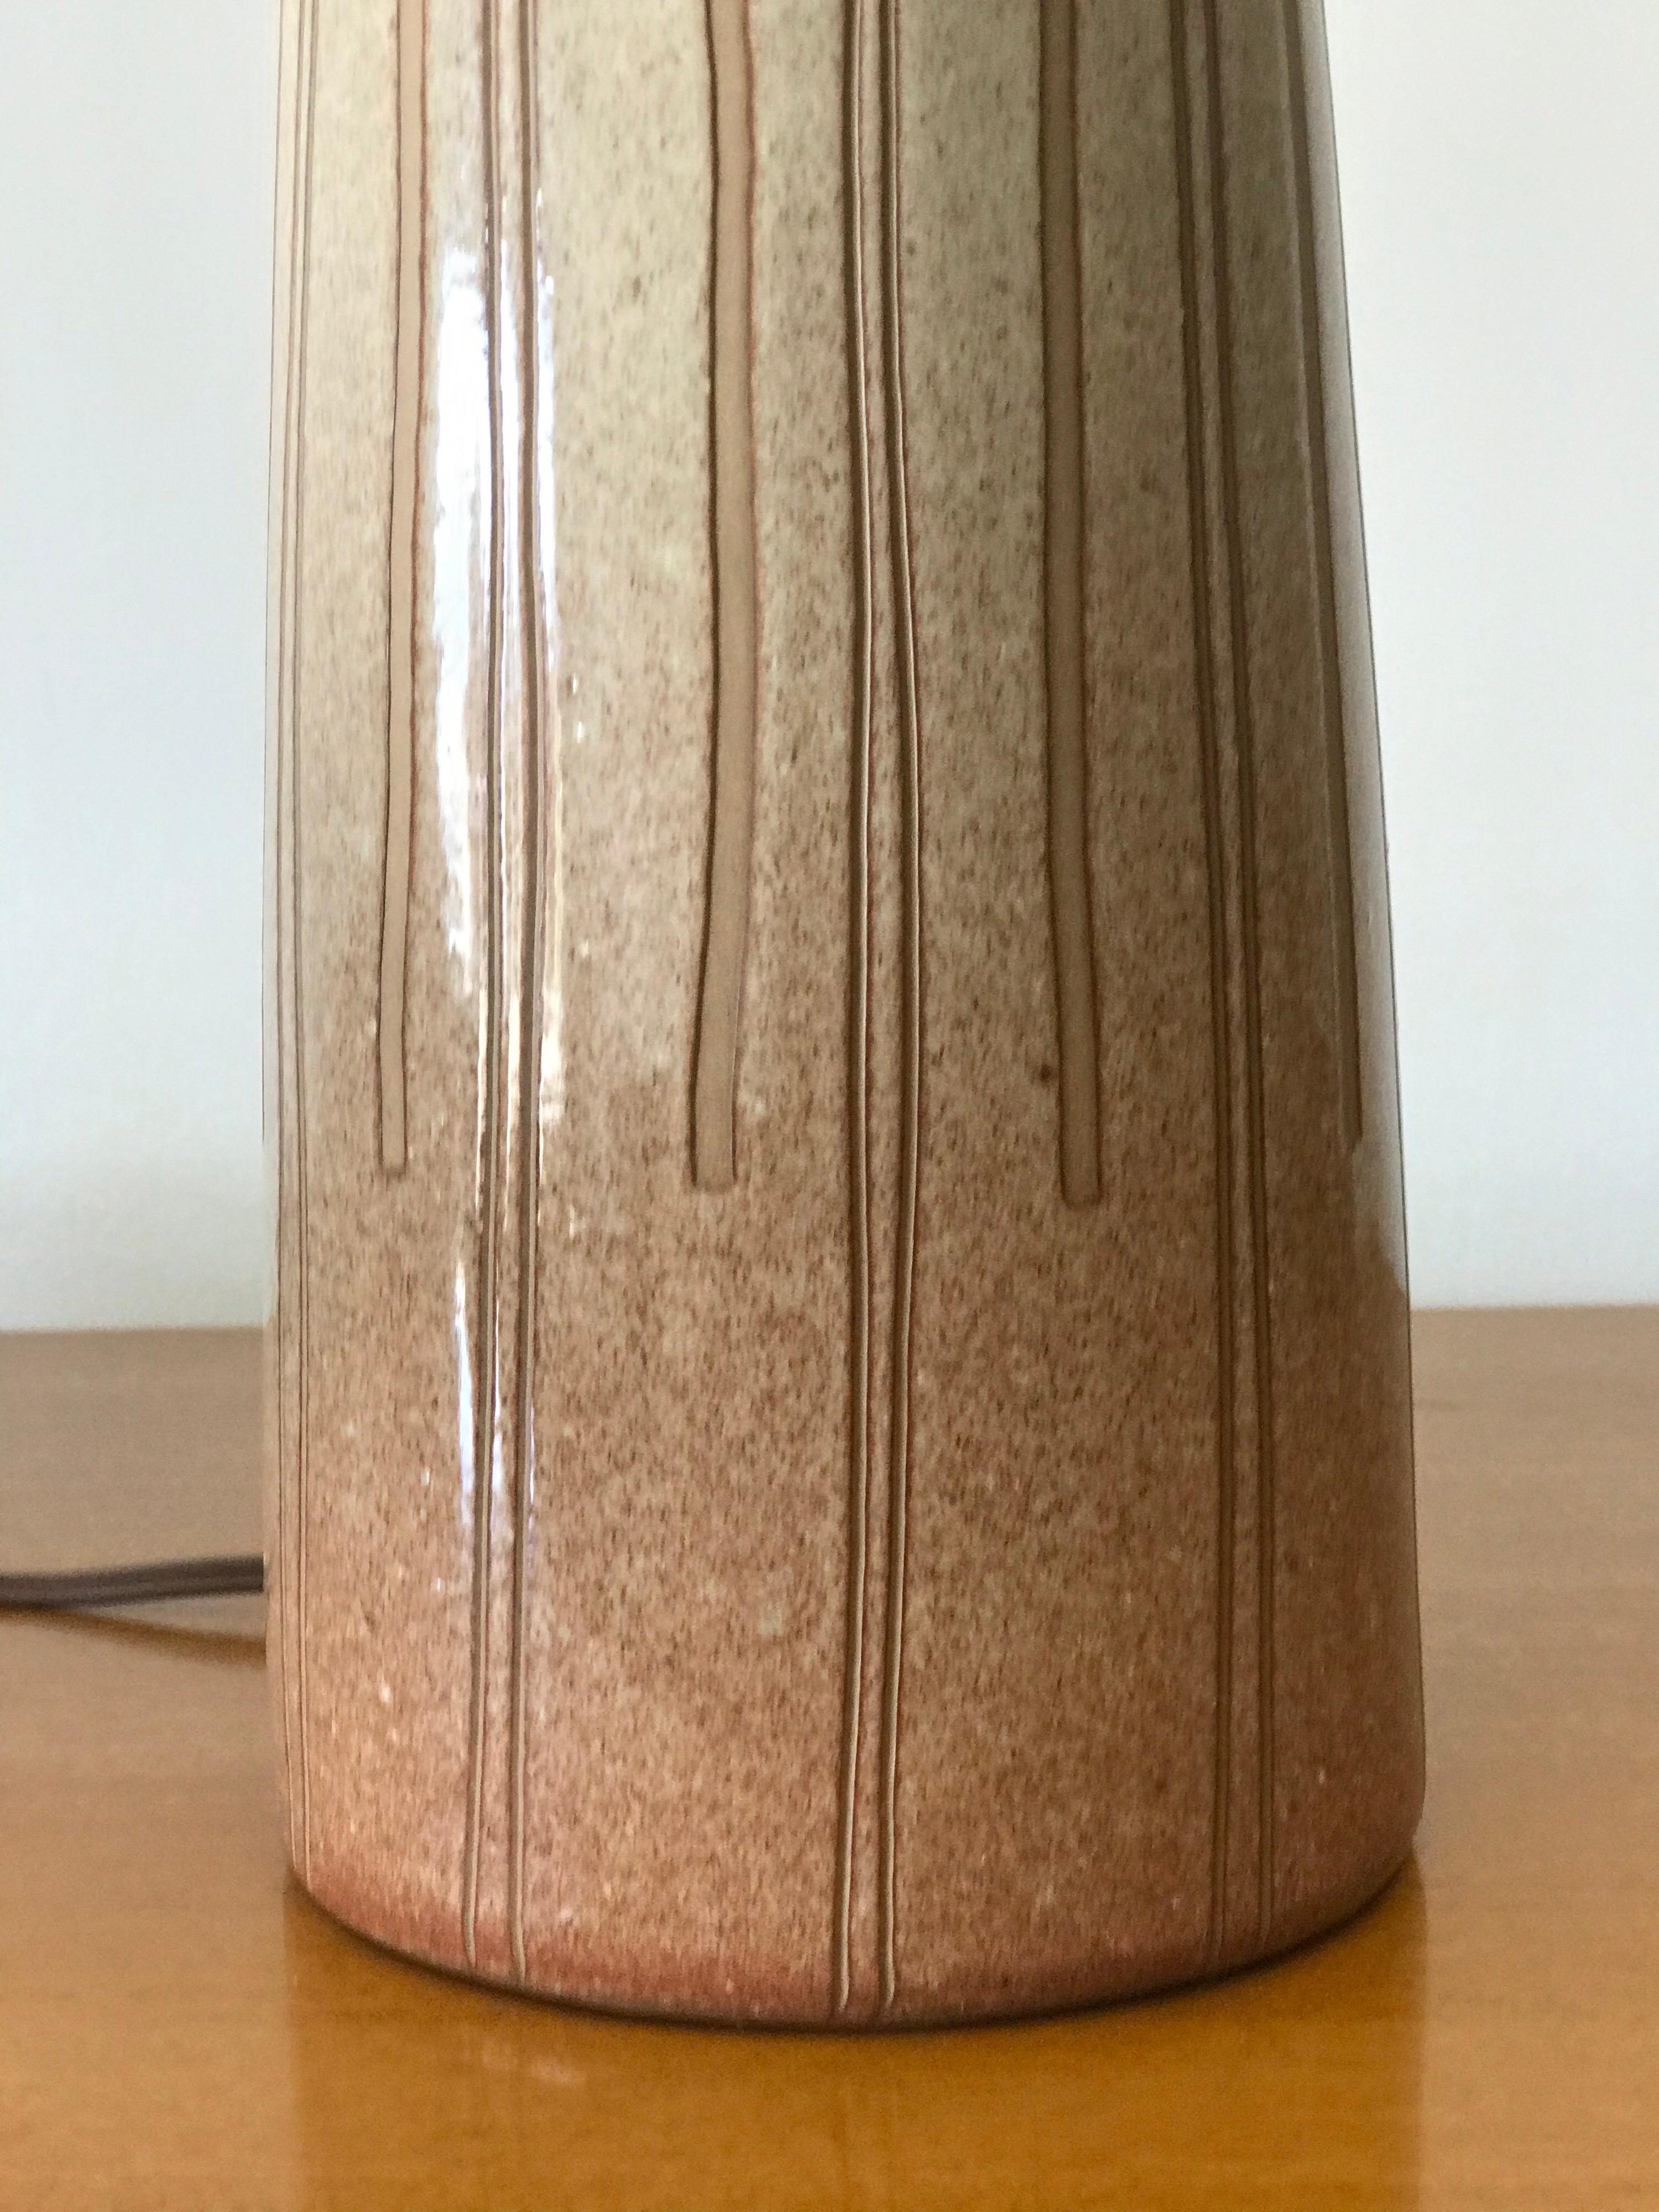 Table lamp by ceramicist duo Jane and Gordon Martz for Marshall Studios. Blush rose colored with incised spiral detail. 

Measures: Overall 
25” tall 
15” wide 

Ceramic portion 
11” tall 
5